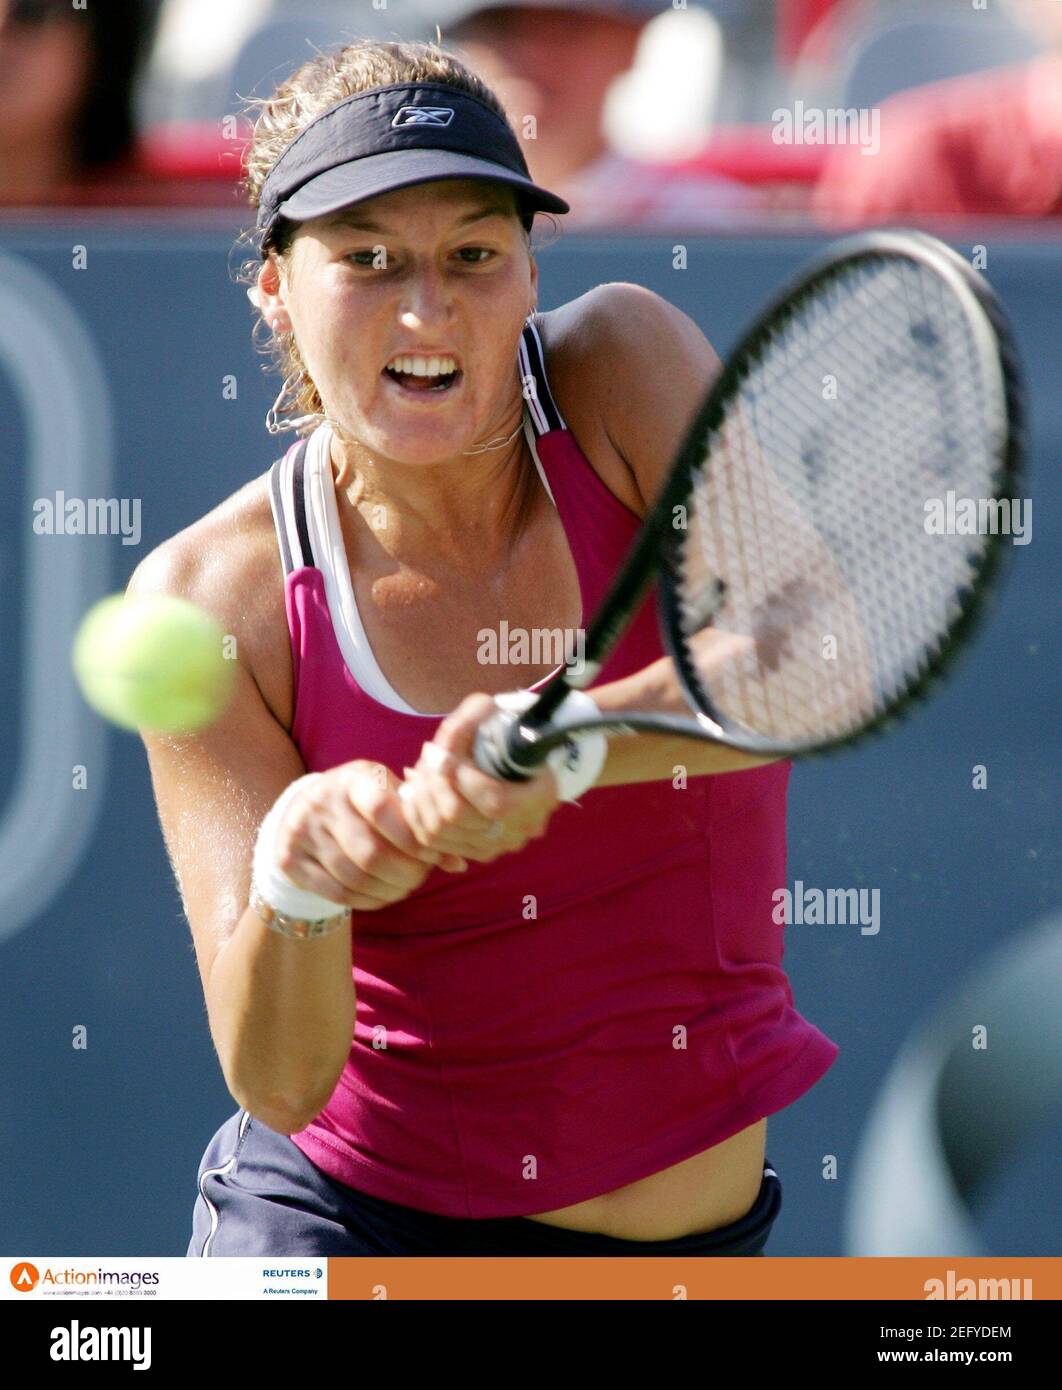 Tennis - Rogers Cup, Sony Ericsson WTA Tour - Montreal, Canada - 18/8/06  Shahar Peer of Israel returns a shot to Anna Chakvetadze of Russia at the Rogers Cup, Sony Ericsson WTA Tour  Mandatory Credit: Action Images / Chris Wattie  Livepic Stock Photo